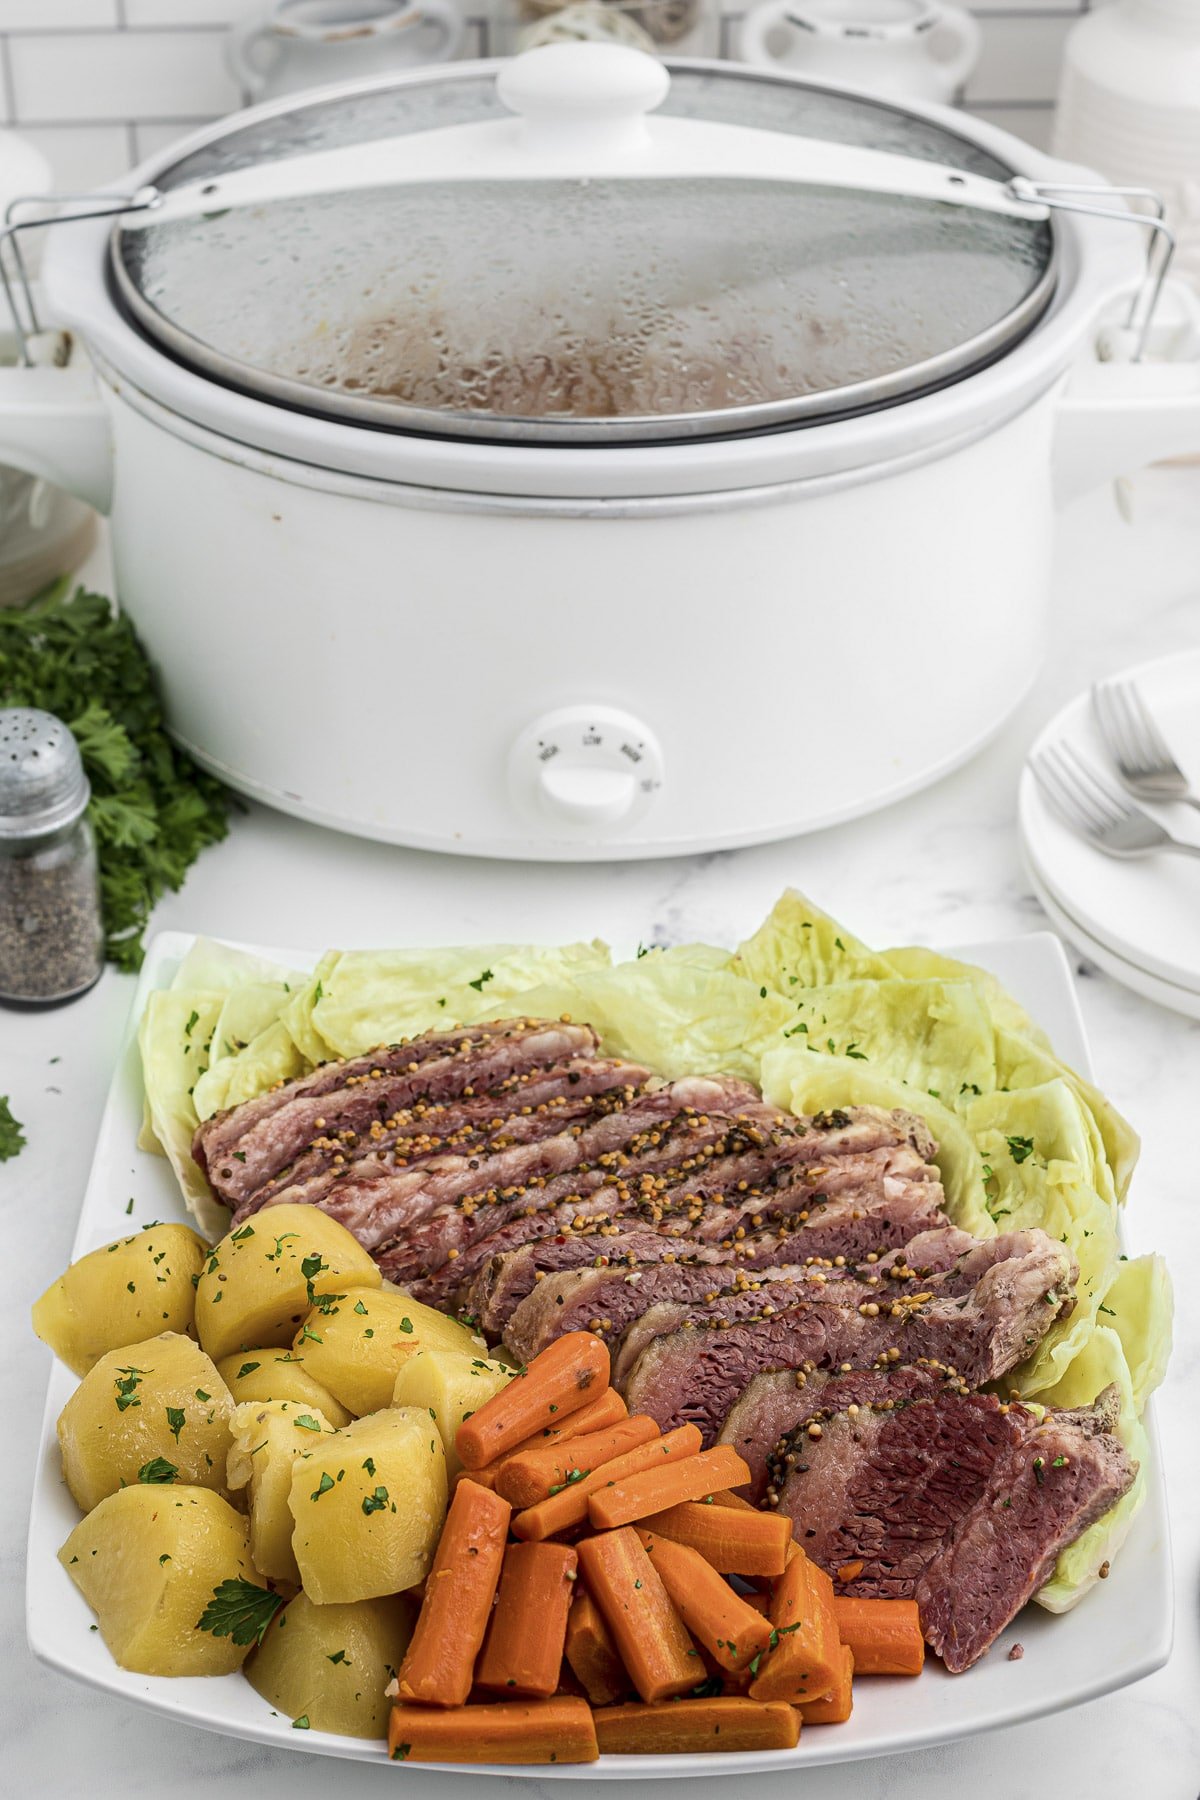 Best Corned Beef & Cabbage Crock Pot Recipe - The Magical Slow Cooker